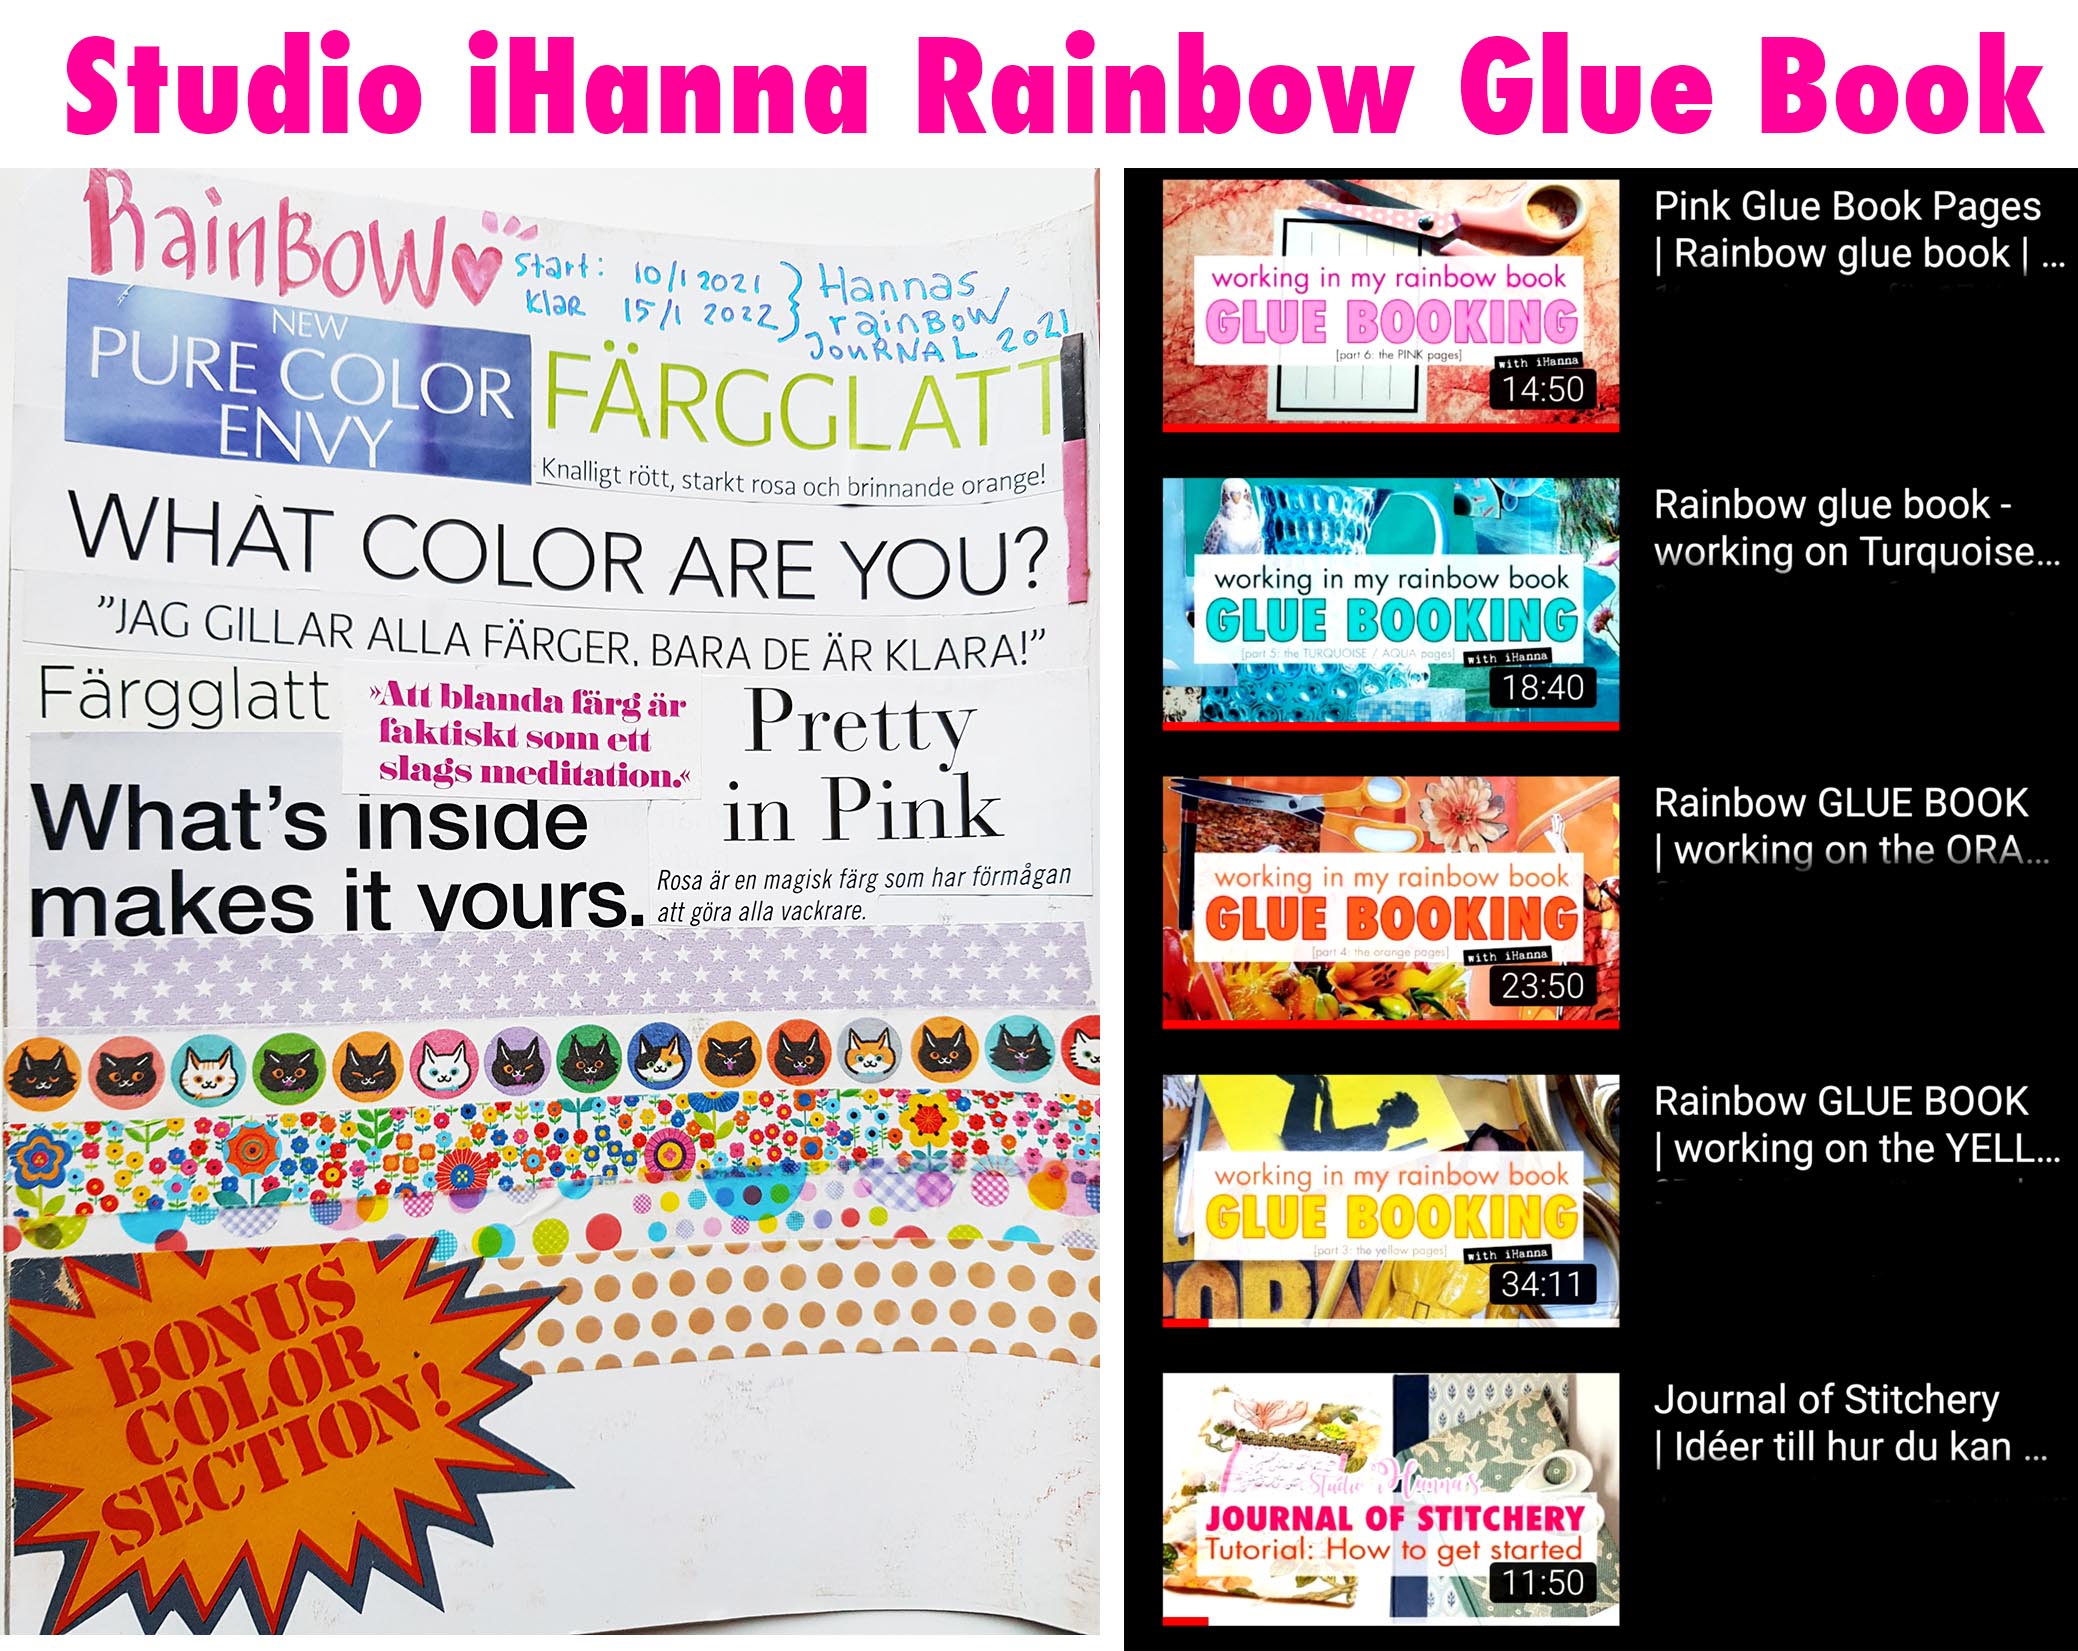 Check out all the videos on Studio iHanna on YouTube #gluebooks